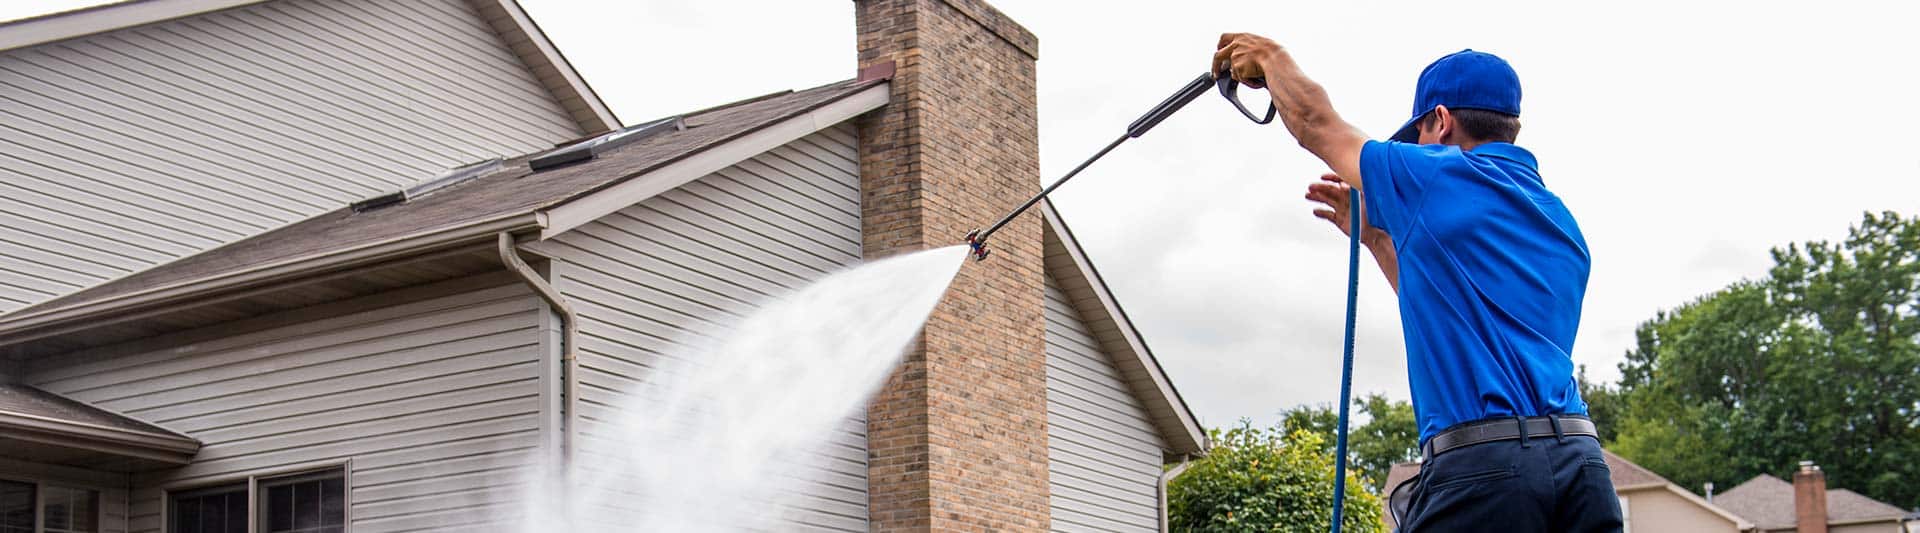 House Washing Services in Carmichael CA